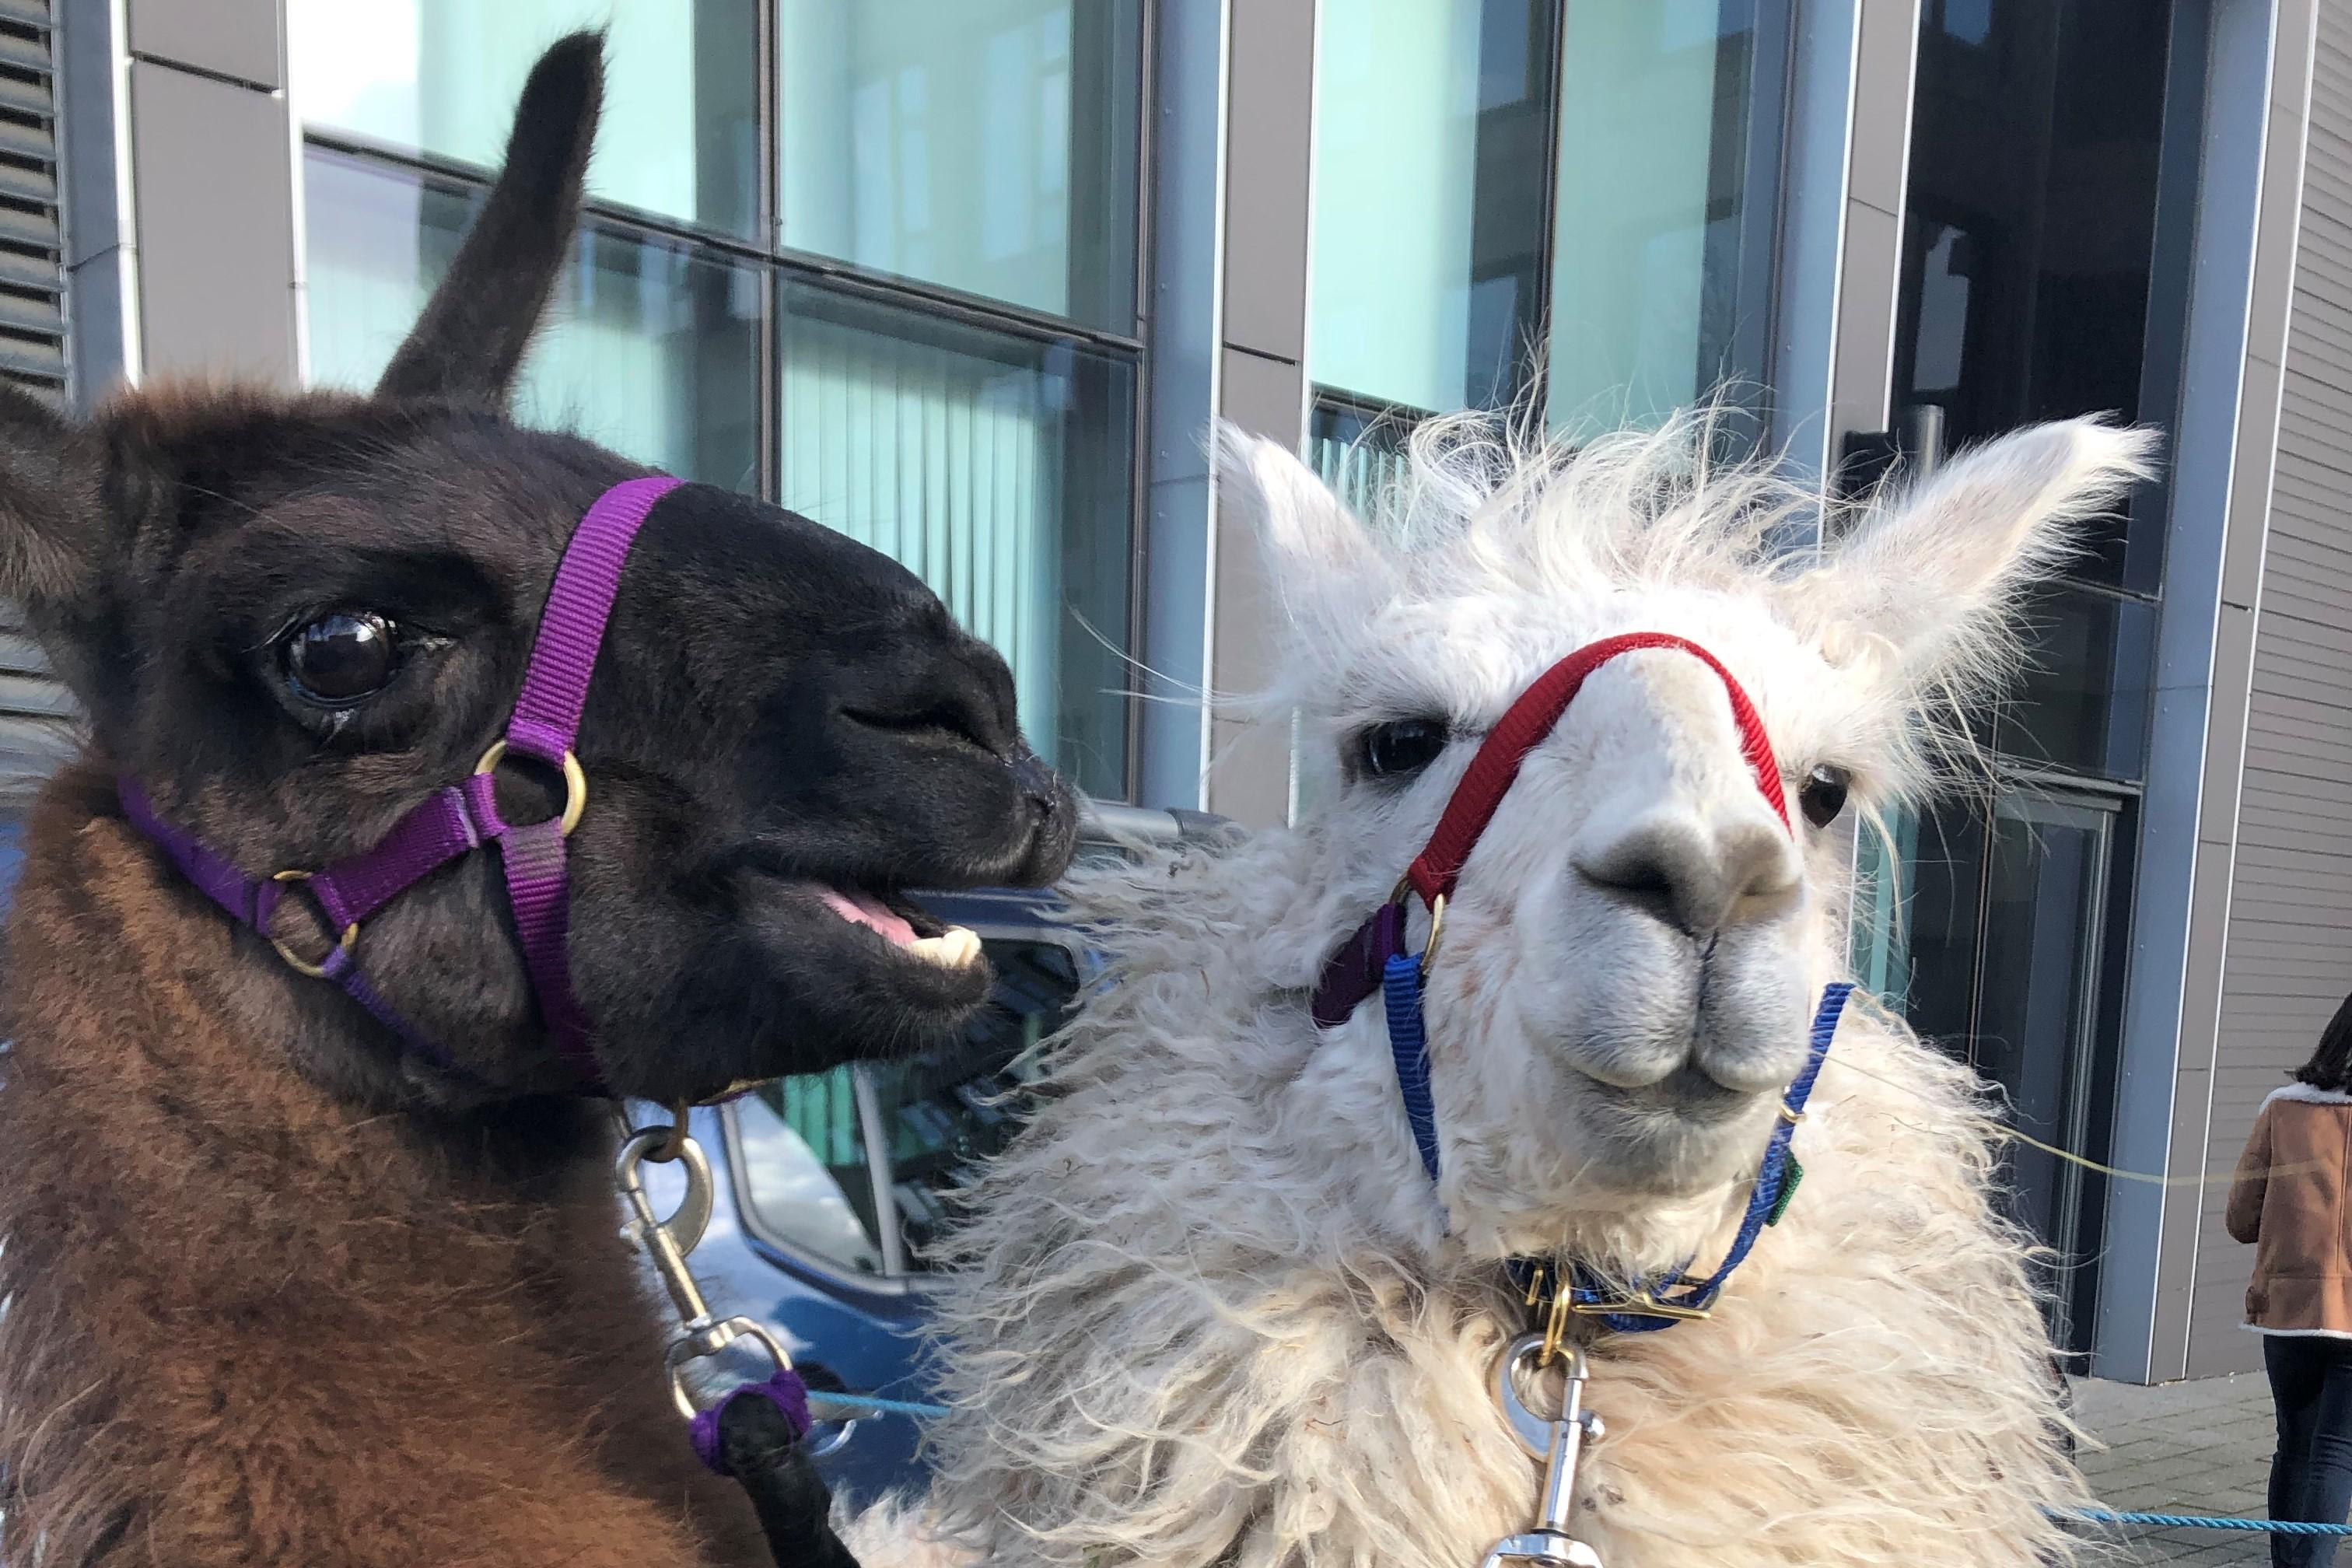 Llamas on campus with ResLife